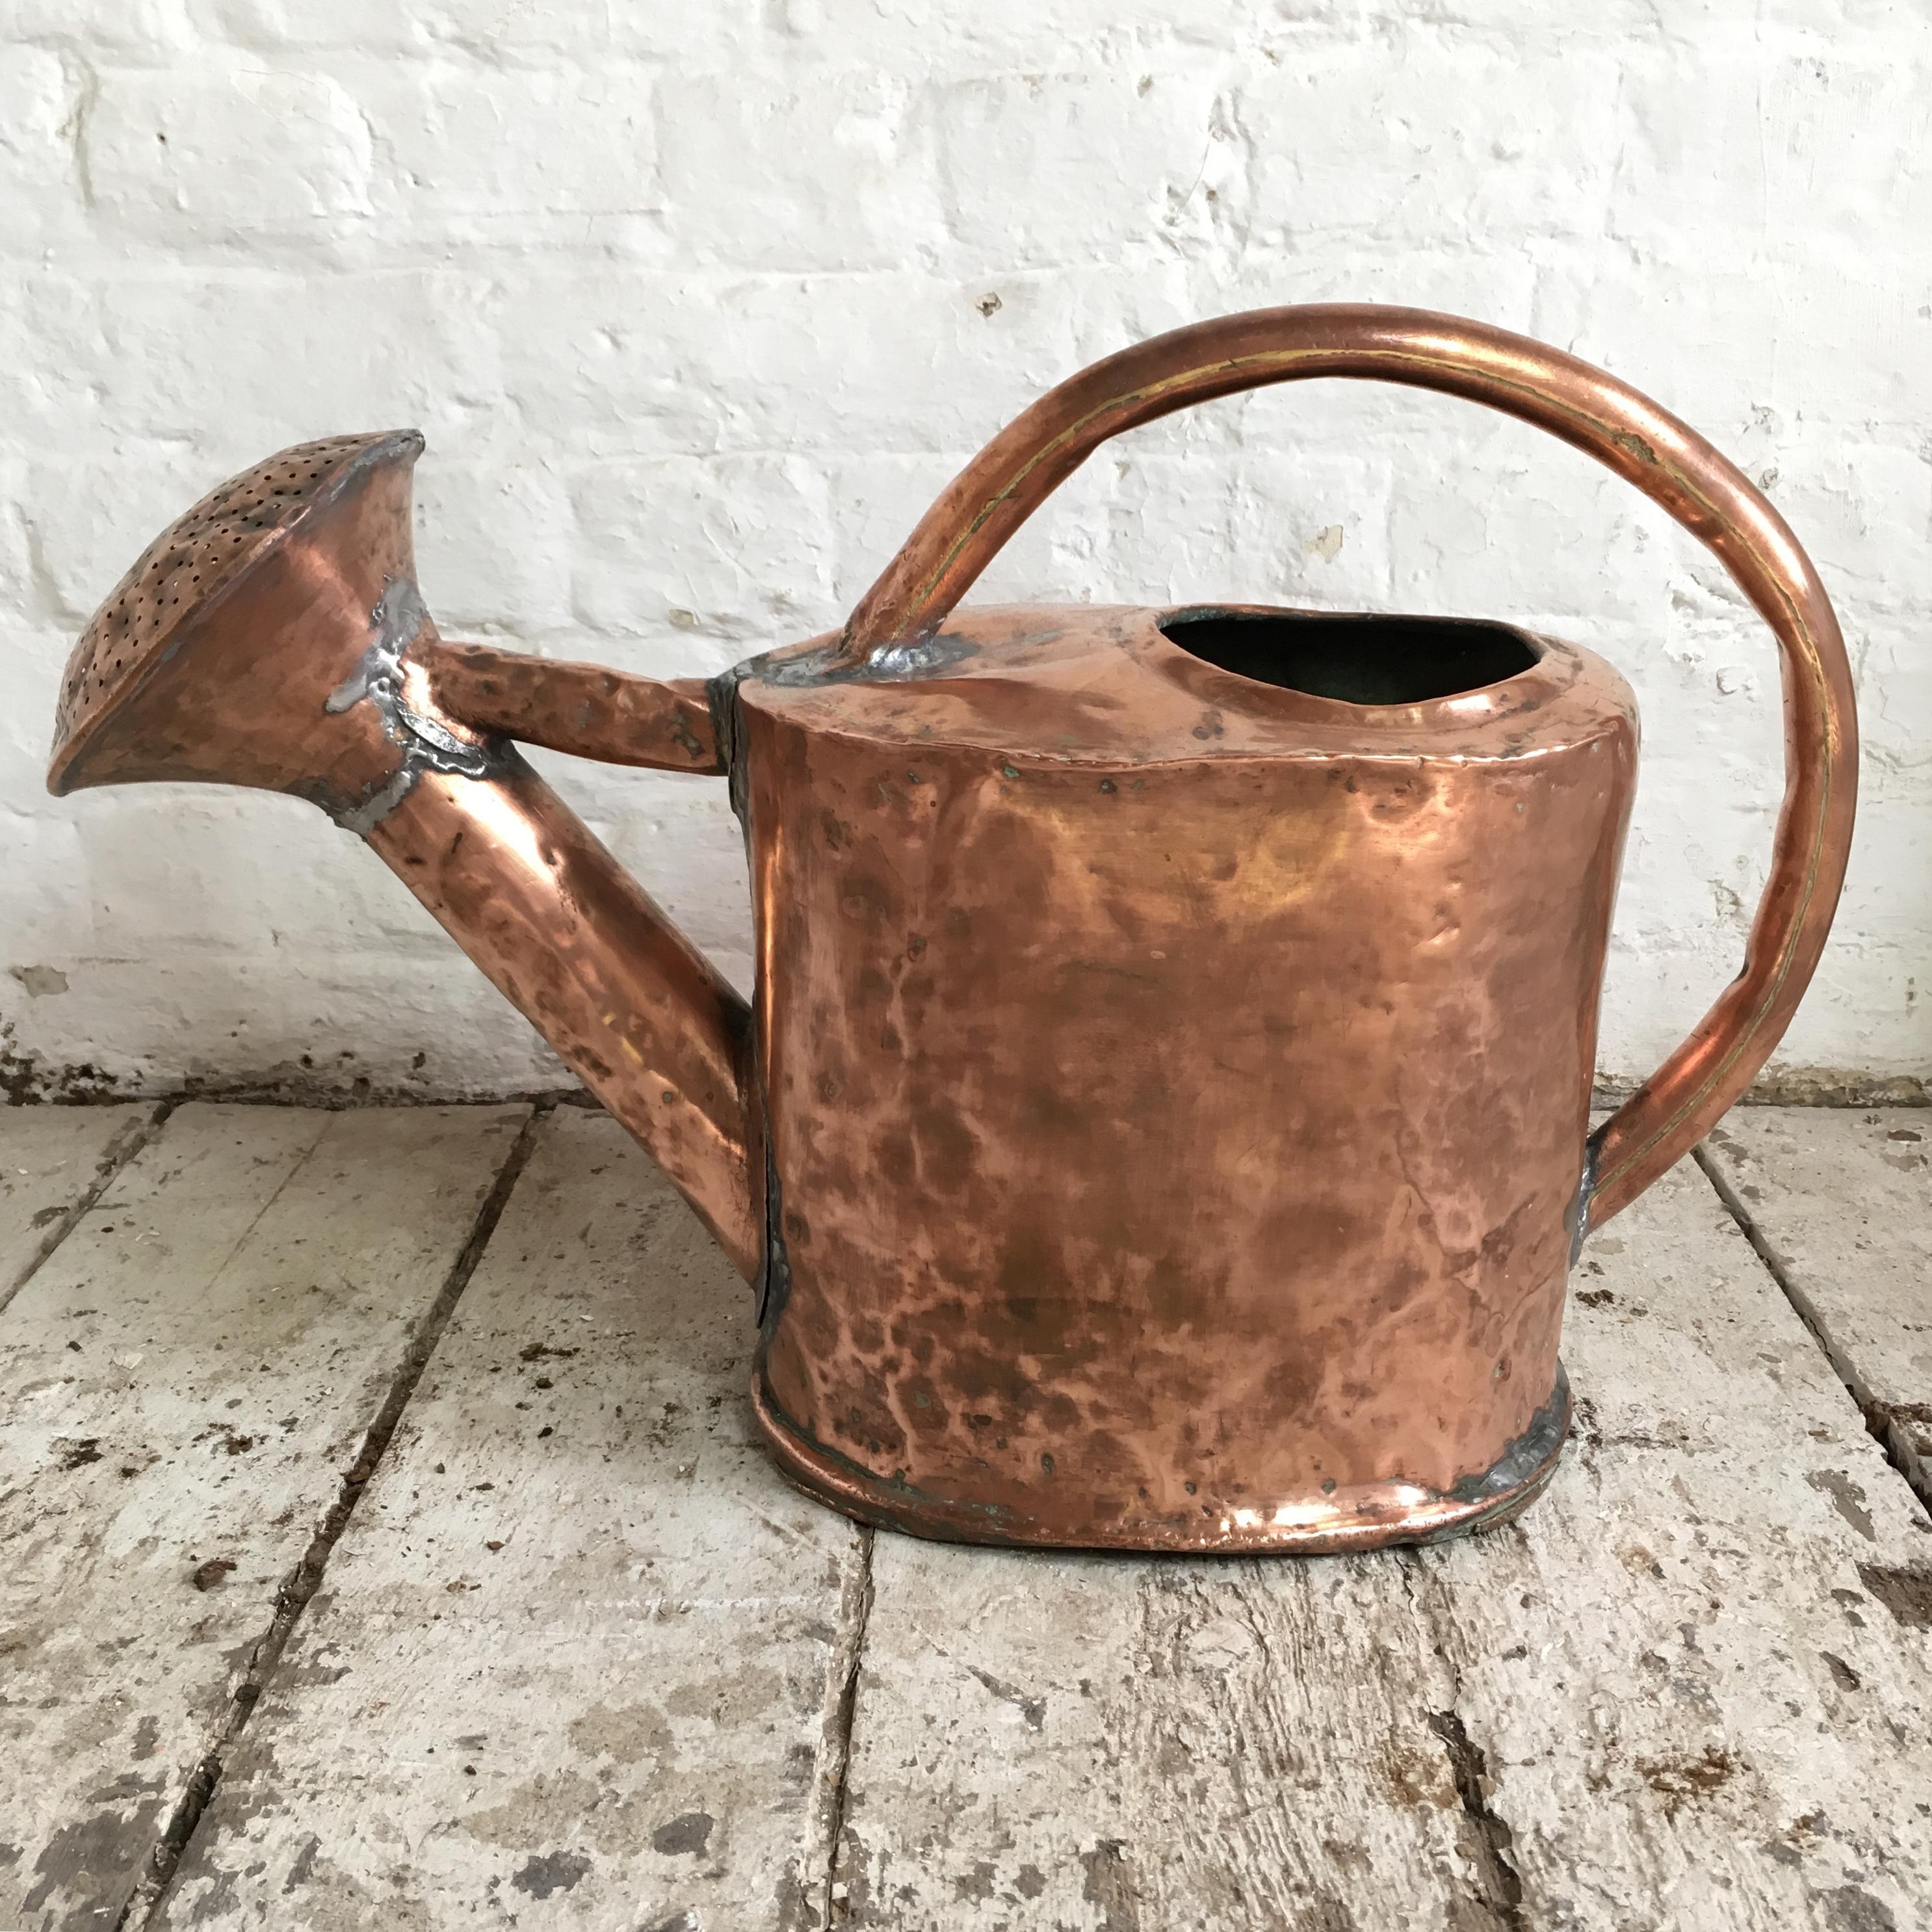 18th century French copper handcrafted watering can.
Measures: 38 cm height
56 cm width
21 cm depth.